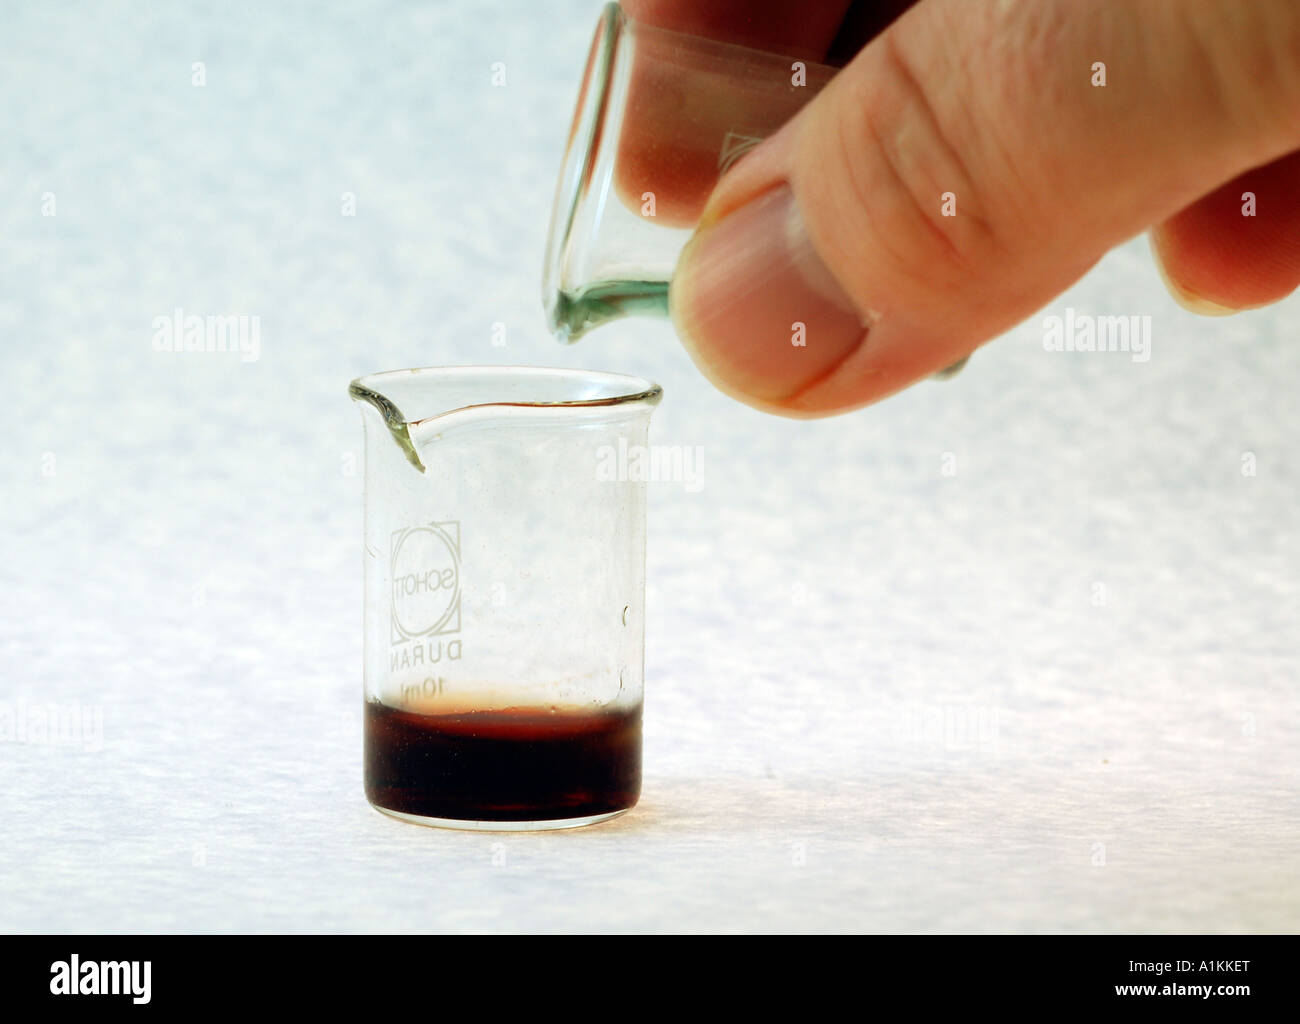 pouring Chemicals into a beaker Stock Photo